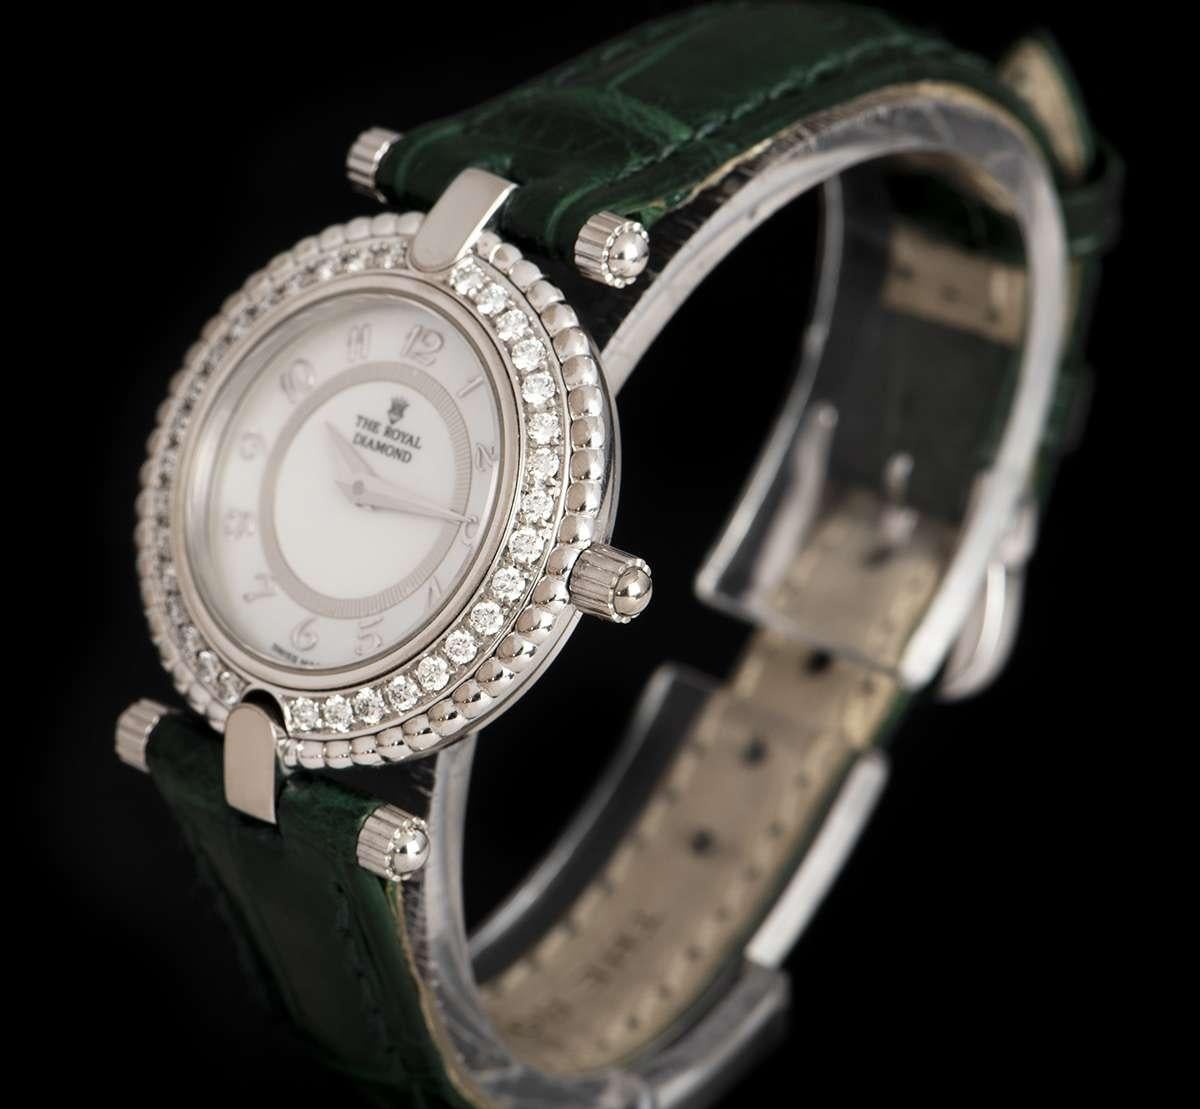 An 18k White Gold Ladies Dress Wristwatch, white mother of pearl dial with applied arabic numbers, a fixed 18k white gold bezel set with approximately 34 round brilliant cut diamonds (~0.49ct), an original green leather strap with a stainless steel